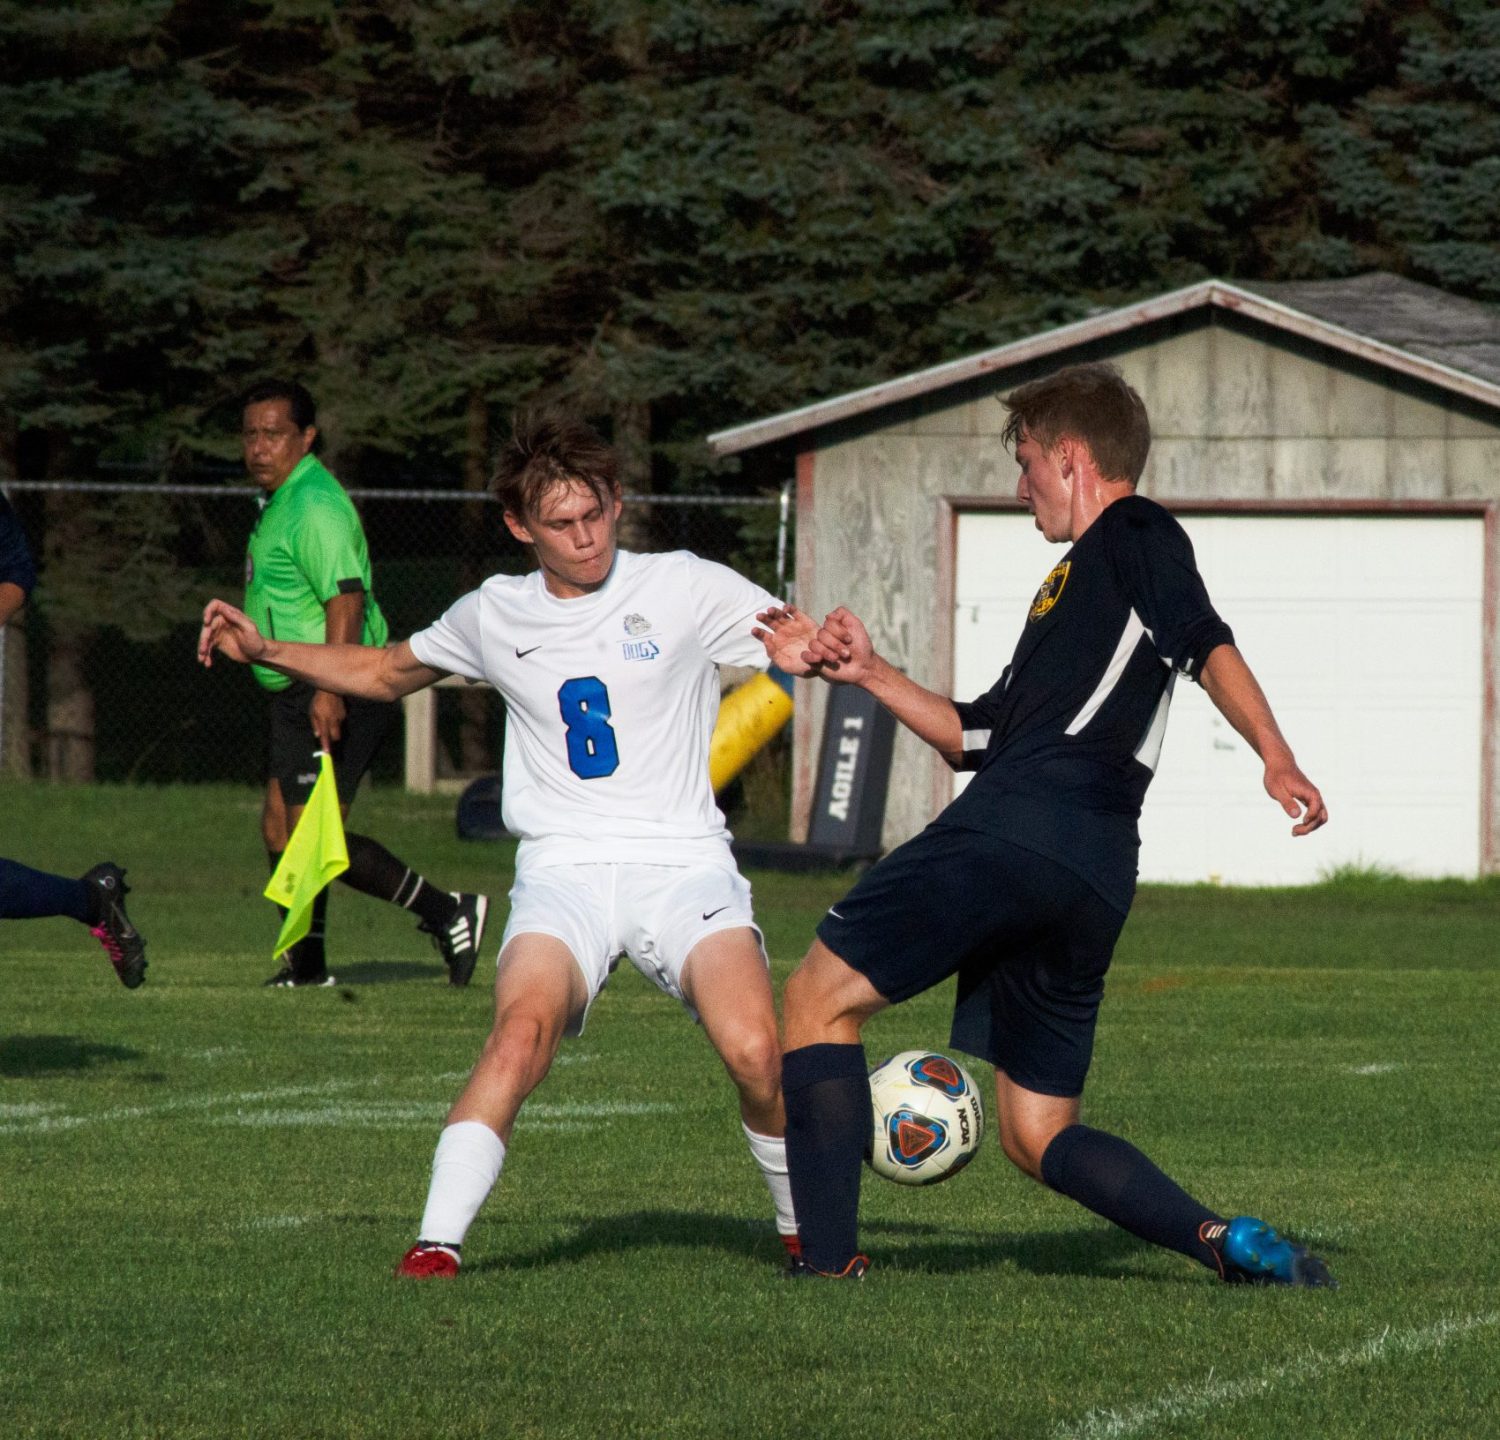 Manistee shuts out Ravenna 4-0 in Monday evening soccer action